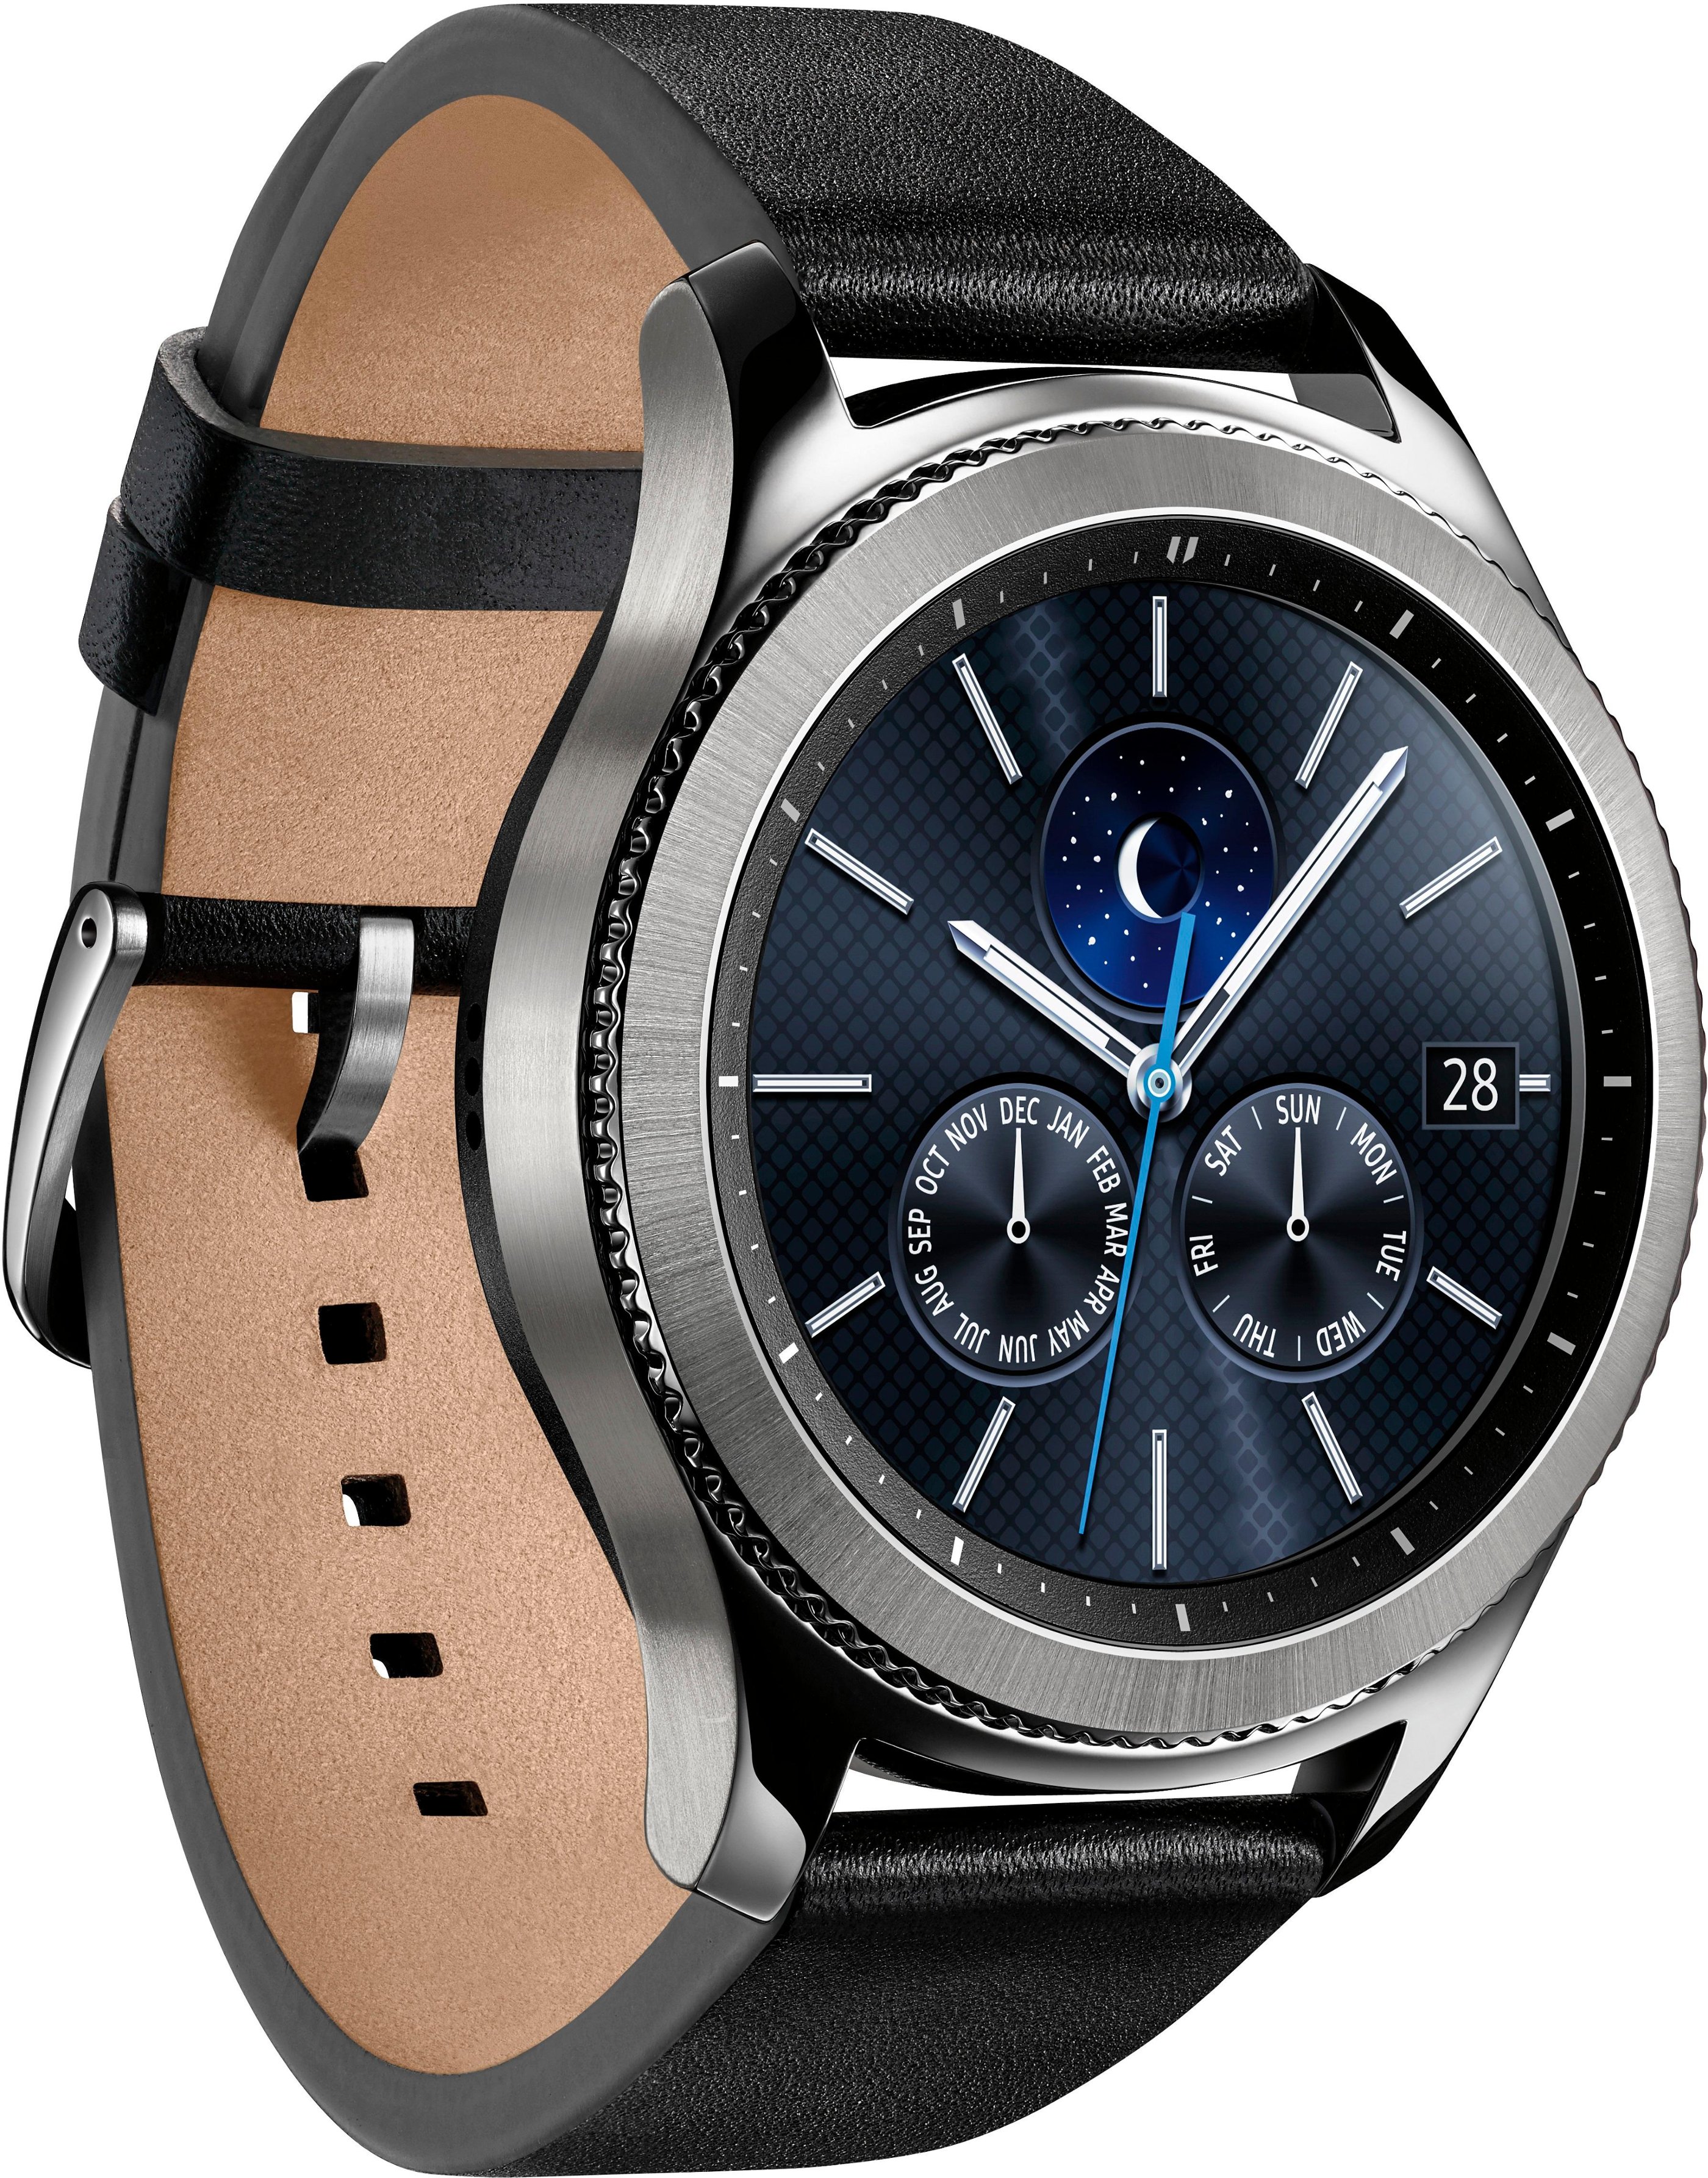 Left View: Samsung - Geek Squad Certified Refurbished Gear S3 Classic Smartwatch 46mm Stainless Steel - Silver